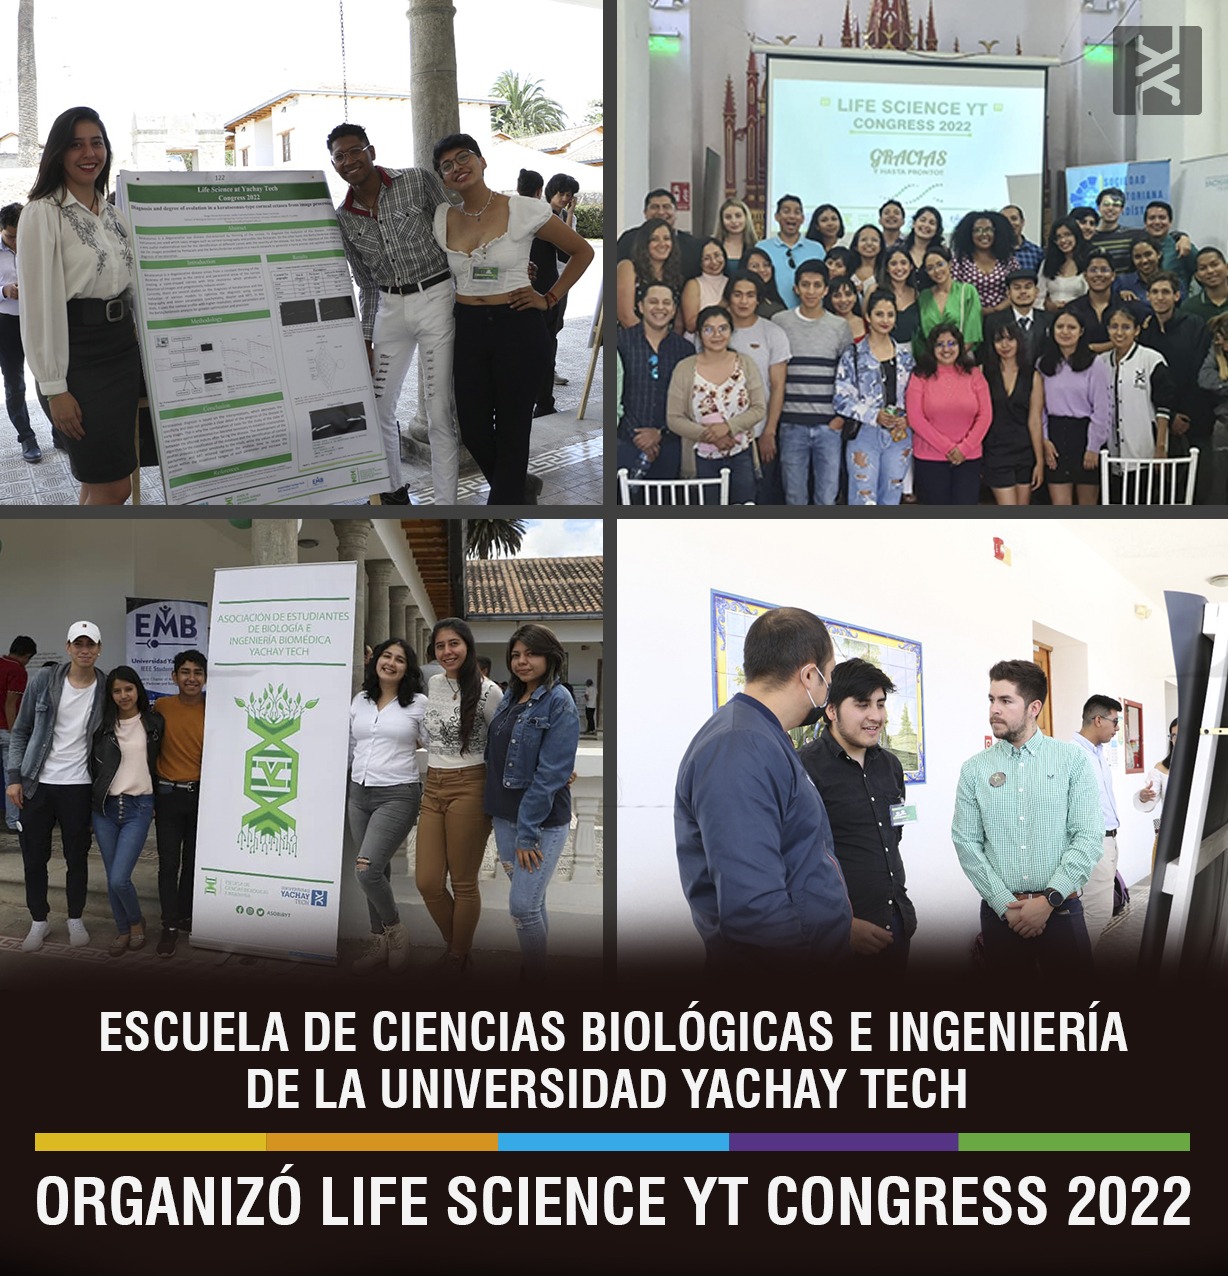 THE SCHOOL OF BIOLOGICAL SCIENCES AND ENGINEERING ORGANIZED THE LIFE SCIENCE YT CONGRESS 2022